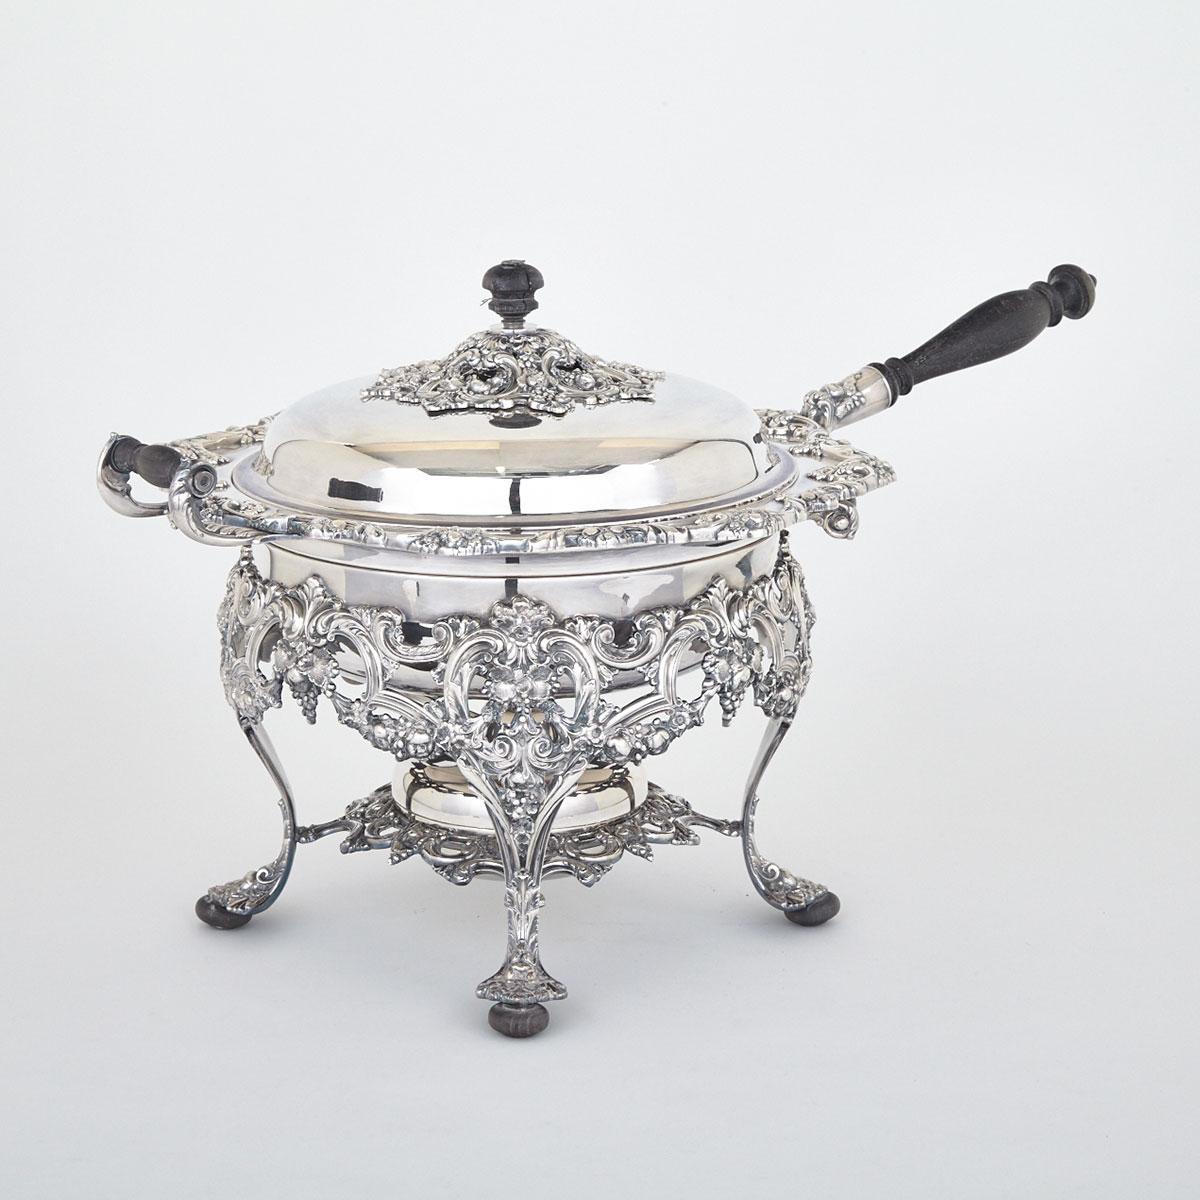 American Silver Plated Chafing Dish on Warming Stand, Elizur B. Webster & Son, Brooklyn, NY, 20th century